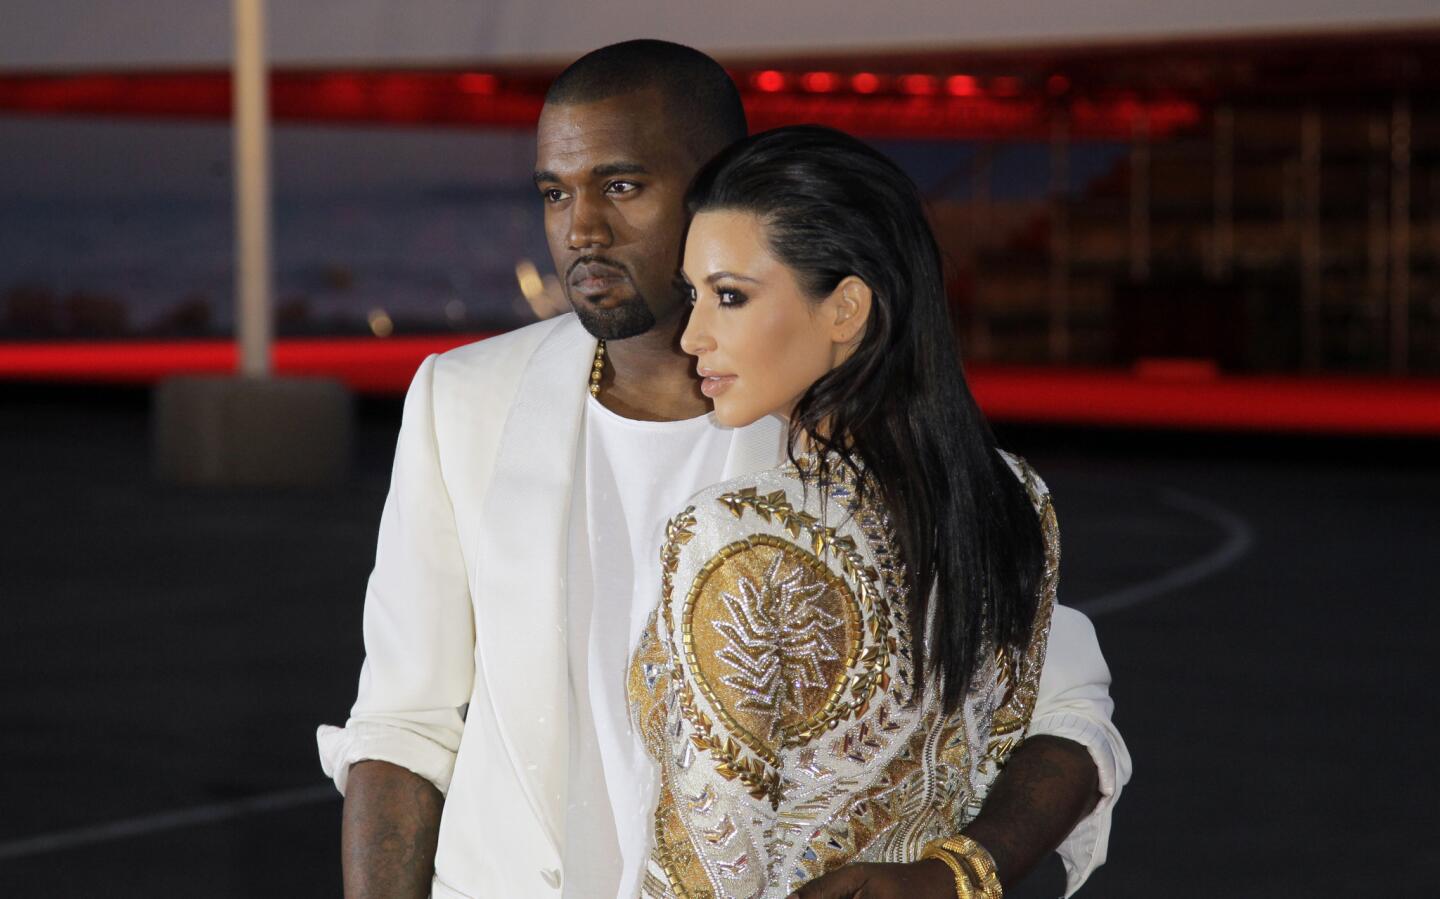 Months after Kim Kardashian's highly publicized breakup with NBA player Kris Humphries, Kardashian was spotted with Kanye West, a longtime friend. In December 2012, after nine months of dating, the couple announced they were expecting a child together. They welcomed their little girl on June 15, 2013. Read: Kim Kardashian is pregnant, expecting a baby with Kanye West